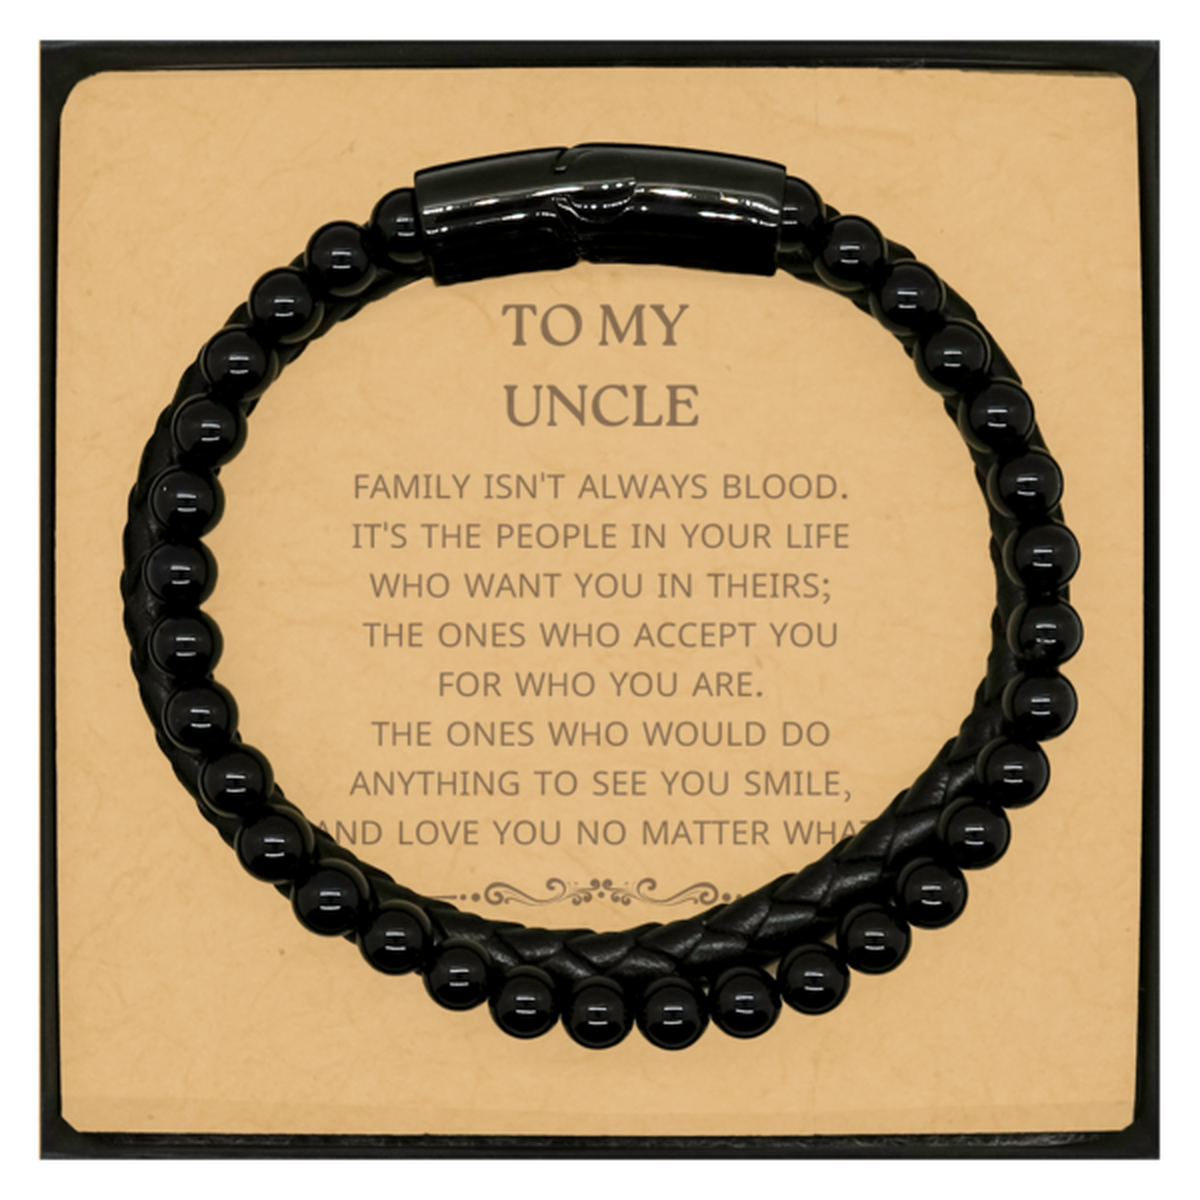 To My Uncle Gifts, Family isn't always blood, Uncle Stone Leather Bracelets, Birthday Christmas Unique Present For Uncle